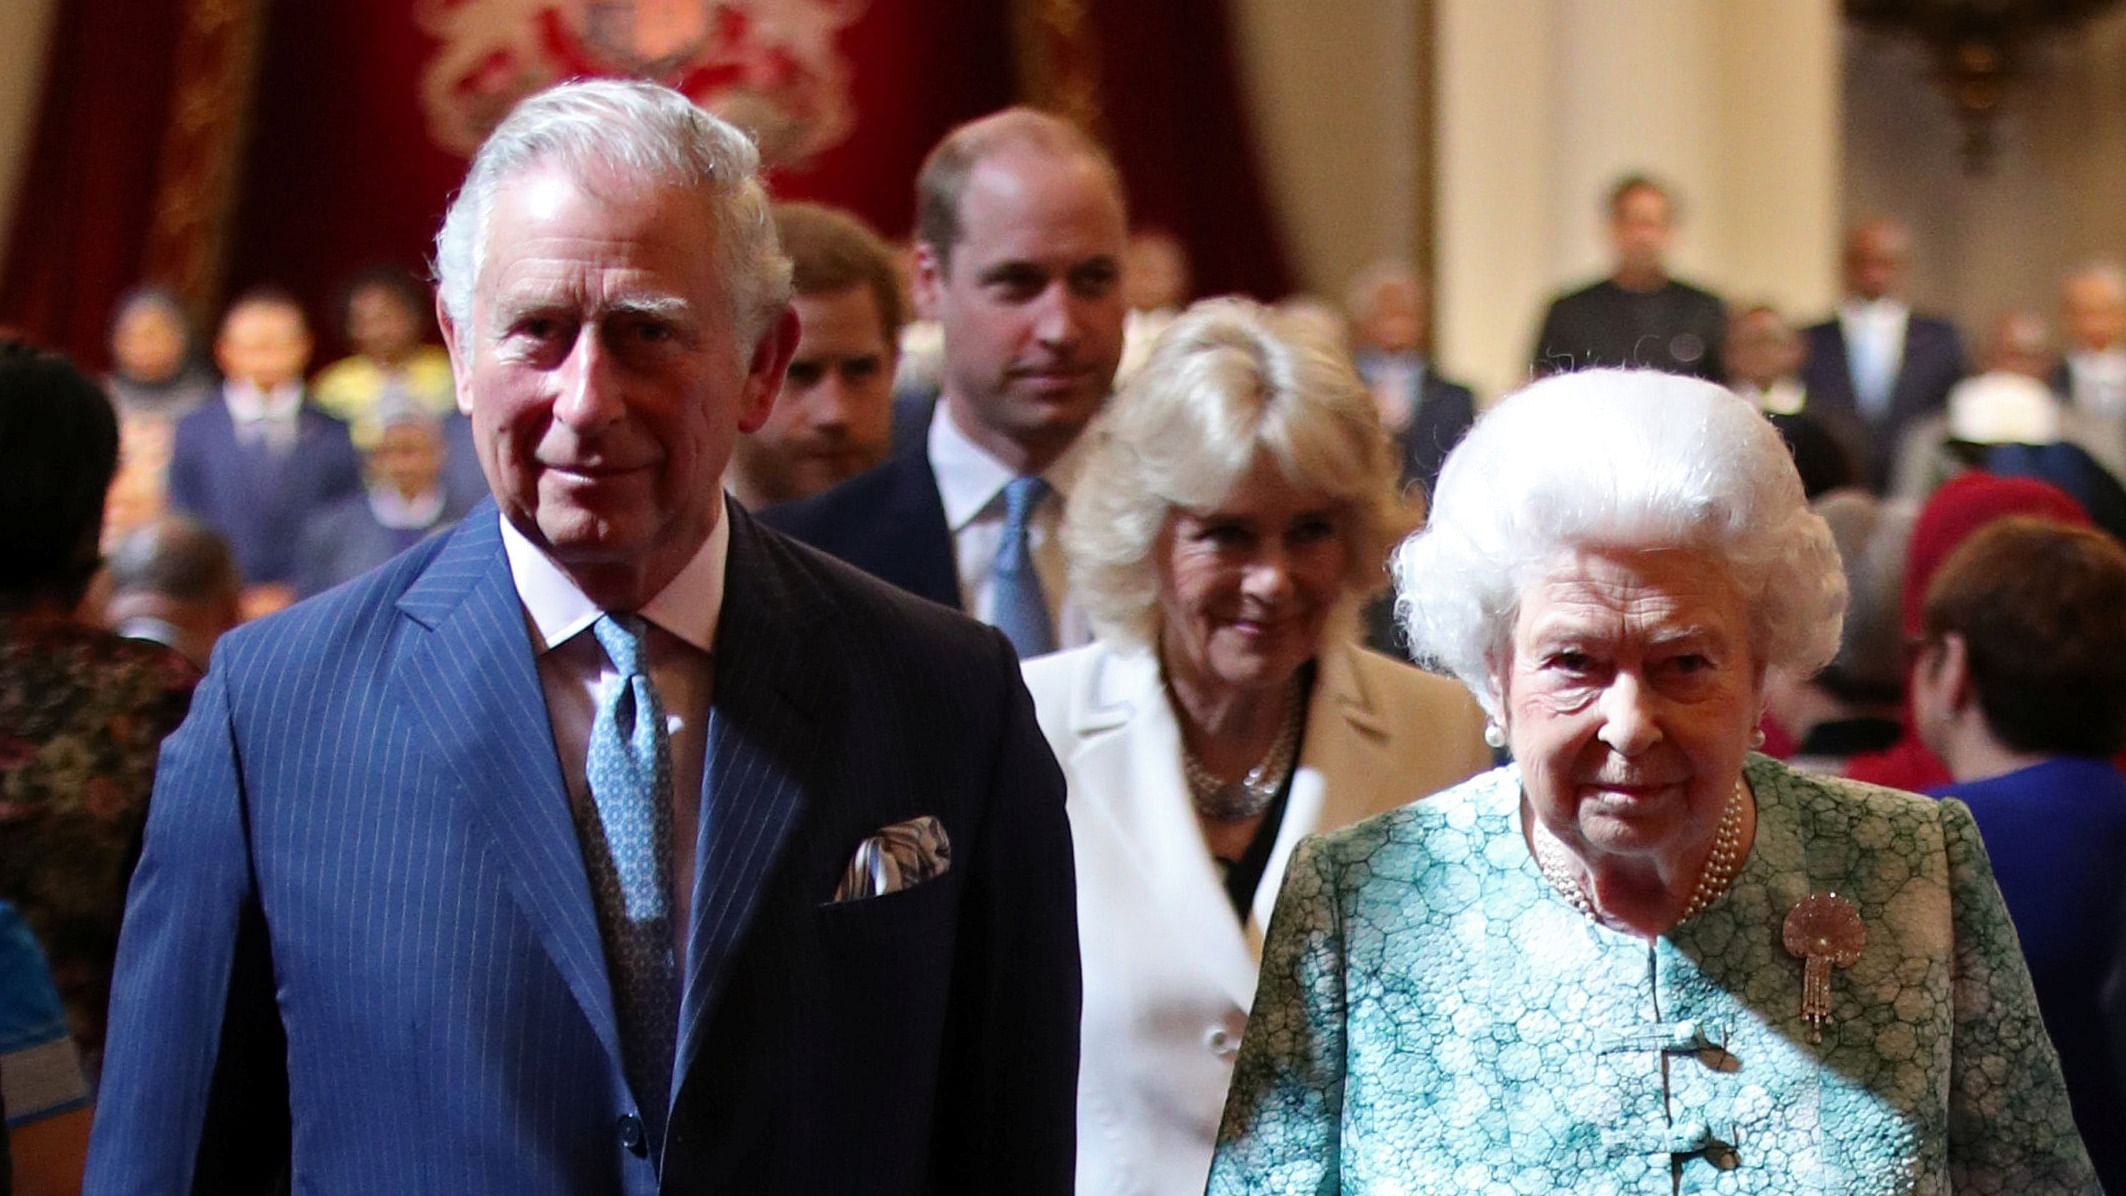 In 2018, Elizabeth expressed her “sincere wish” that Charles would follow her as head of the Commonwealth and its leaders agreed. Credit: Reuters Photo